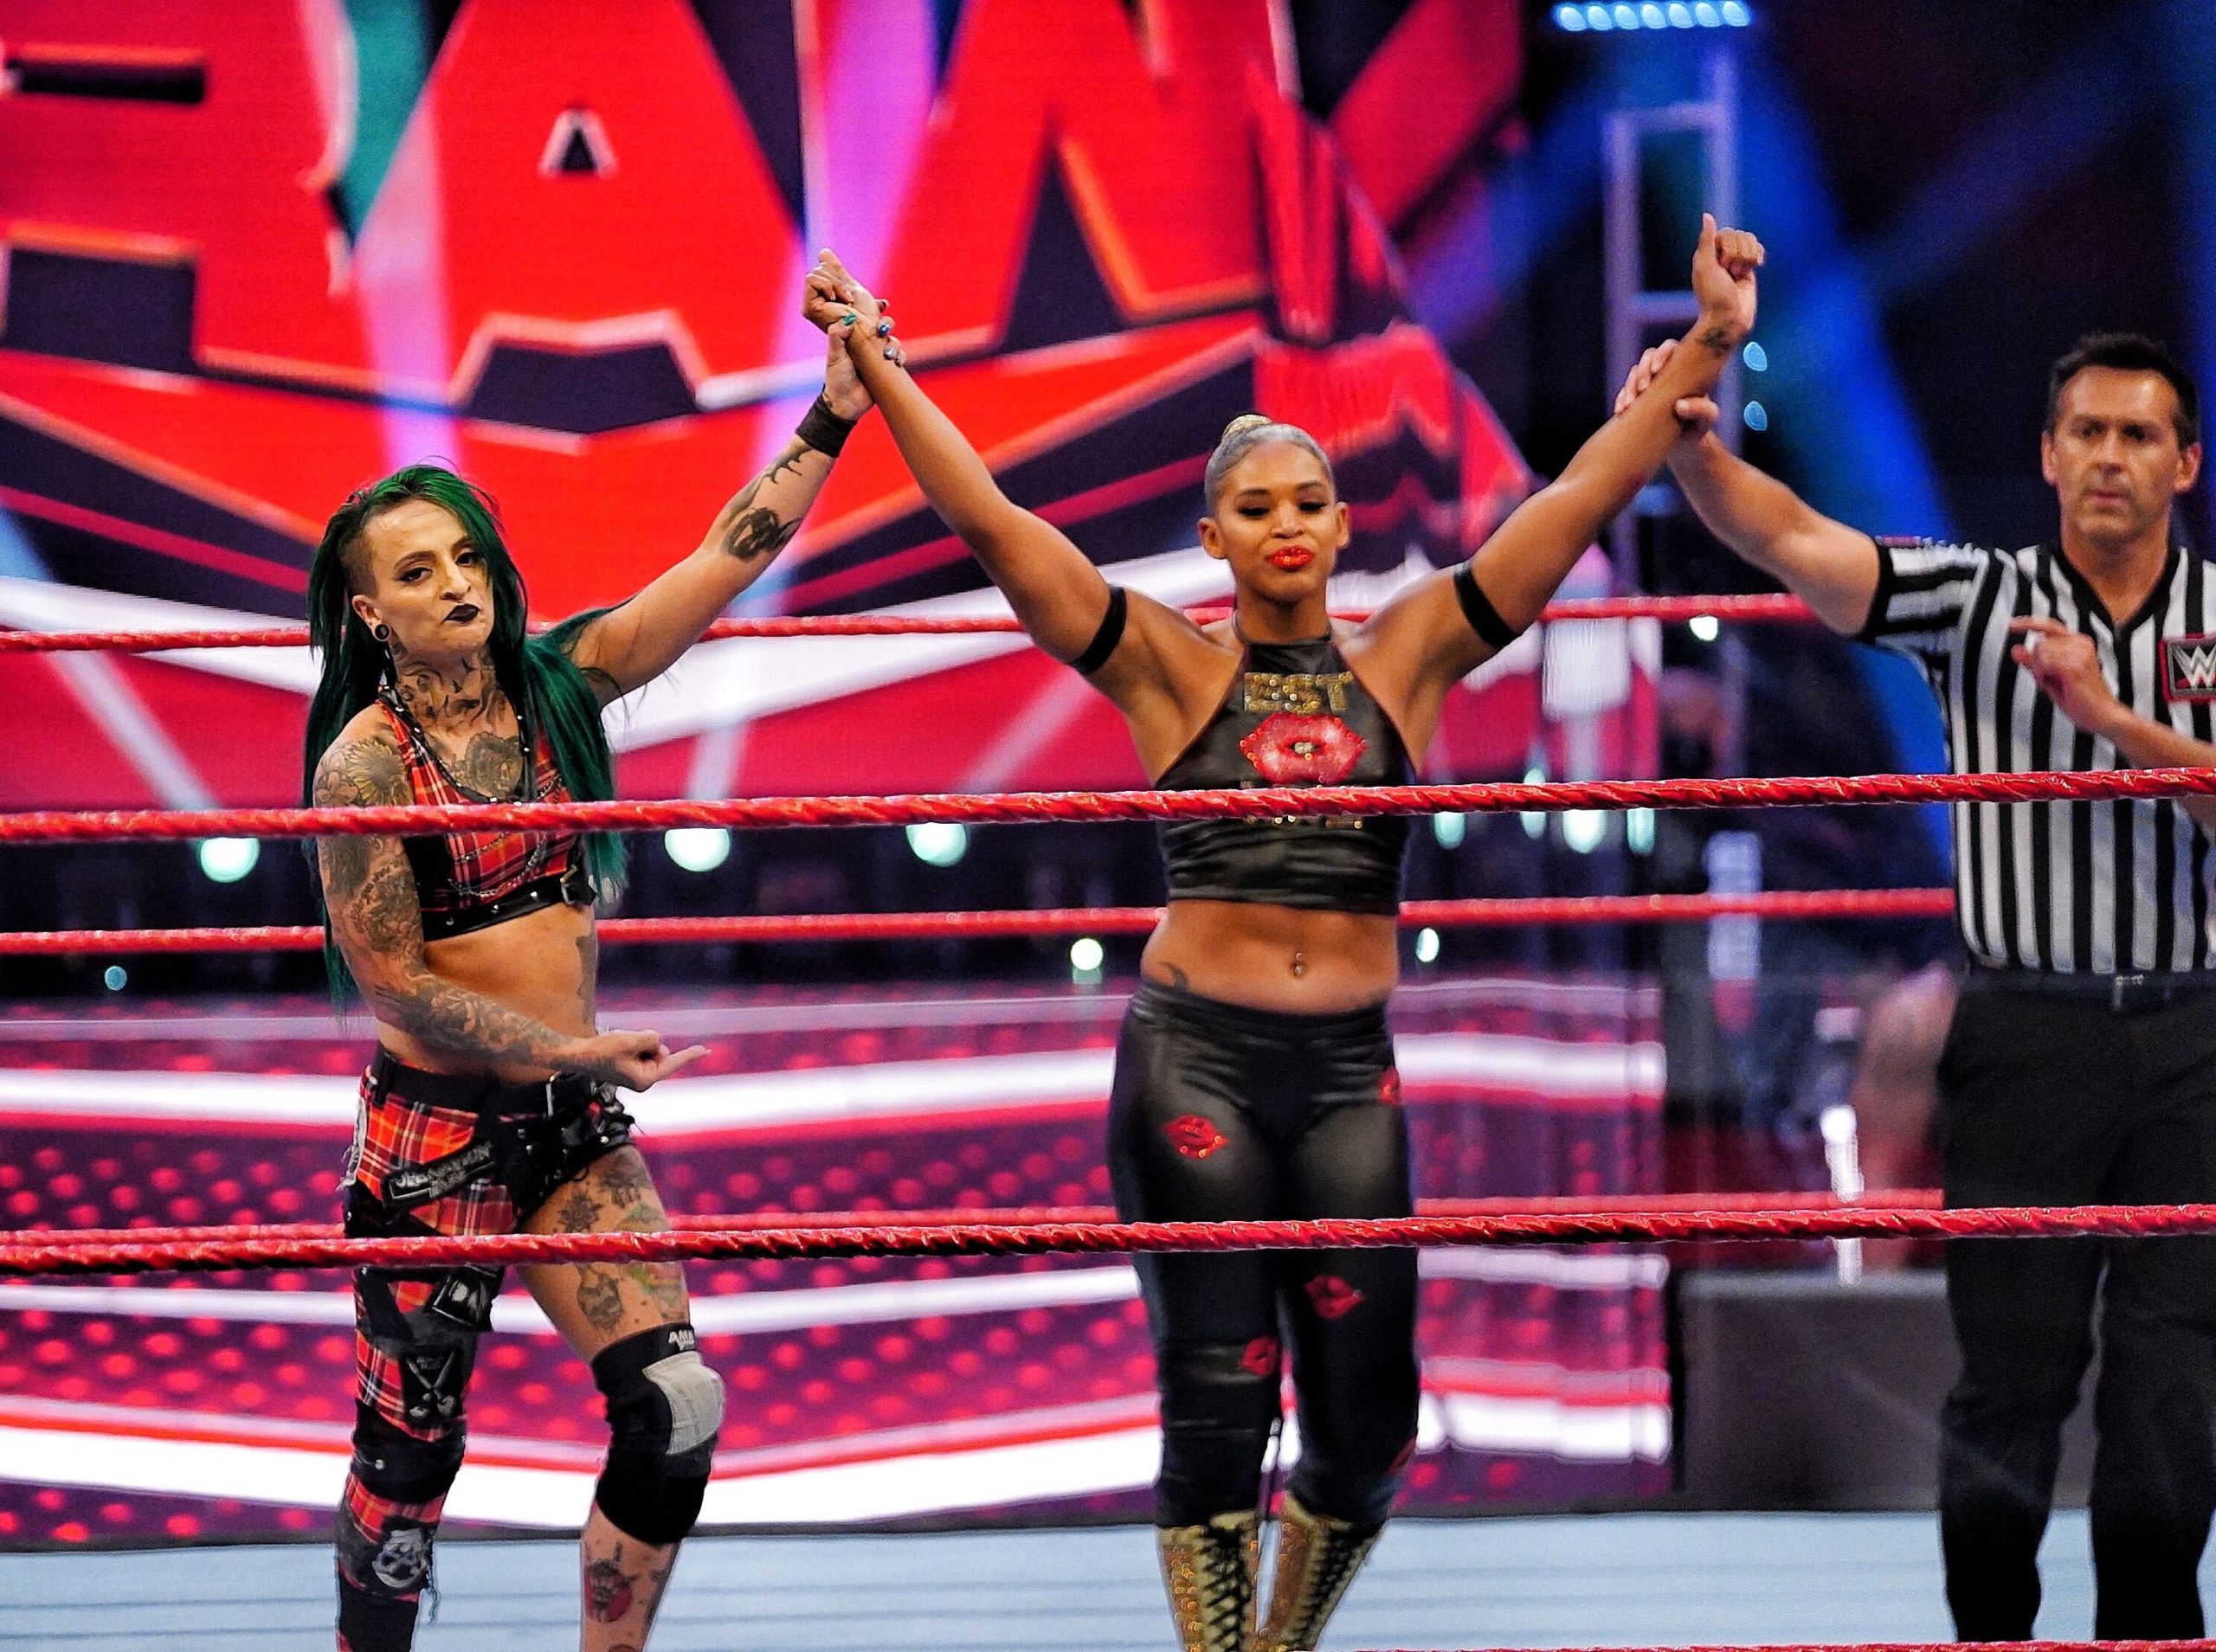 Bianca Belair Returns to RAW, Ruby Riott Makes Cryptic Comment After Landin...